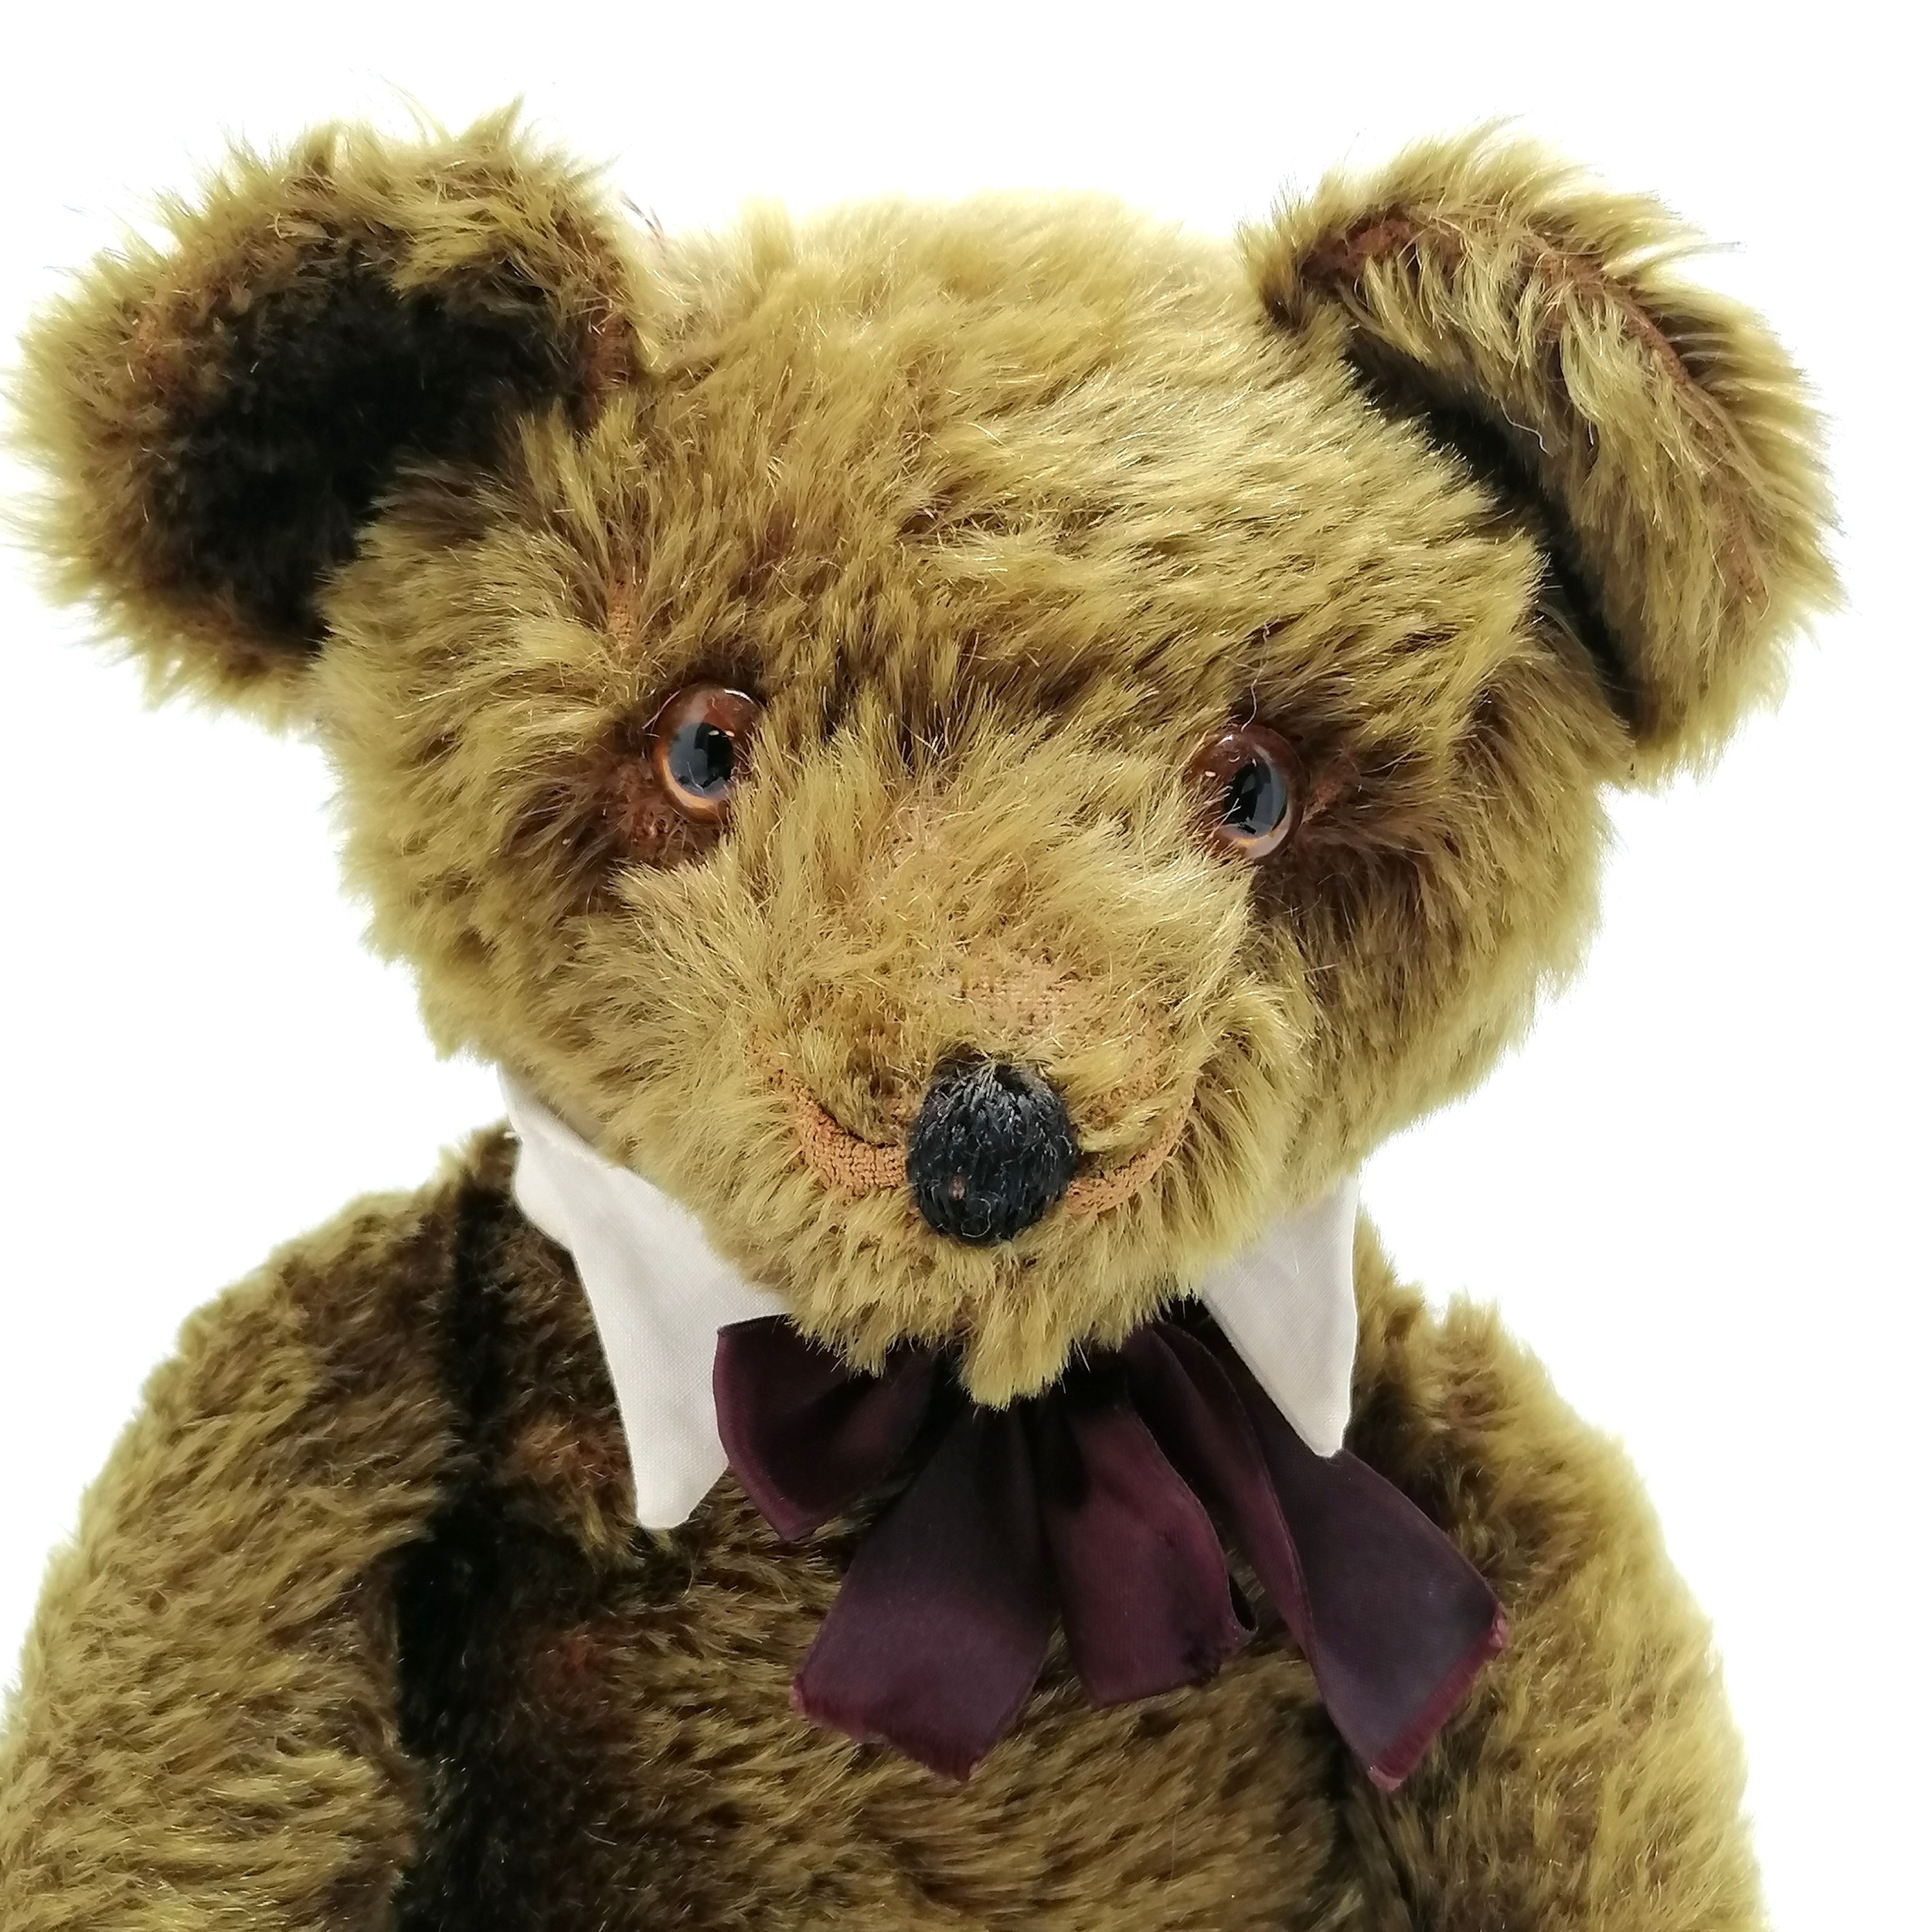 Vintage green mohair jointed Teddy bear 'Knickerbocker' c1940 with glass eyes and stitched nose - Image 4 of 9